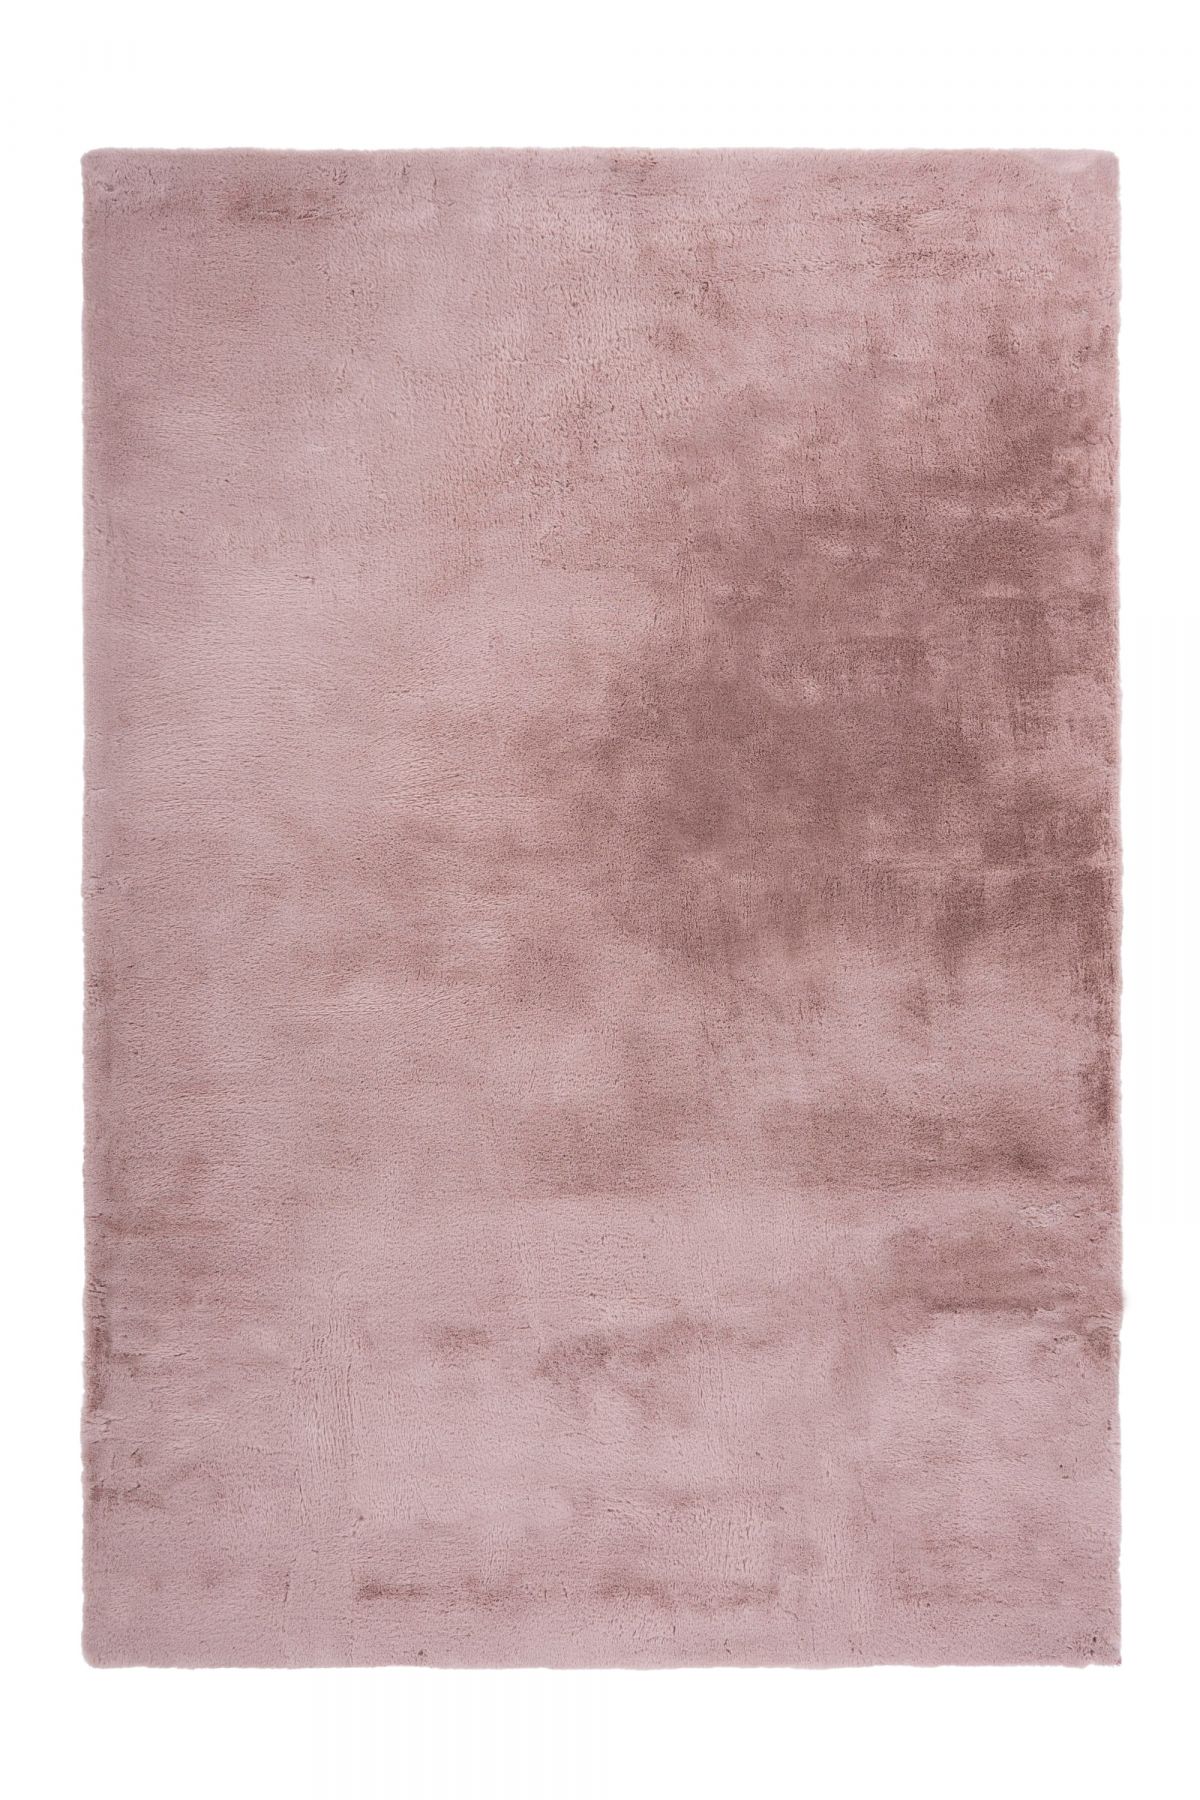 COVOARE - COVOR EMOTION LALEE 500 PASTEL PINK 160*230, comenziperpetuum.ro